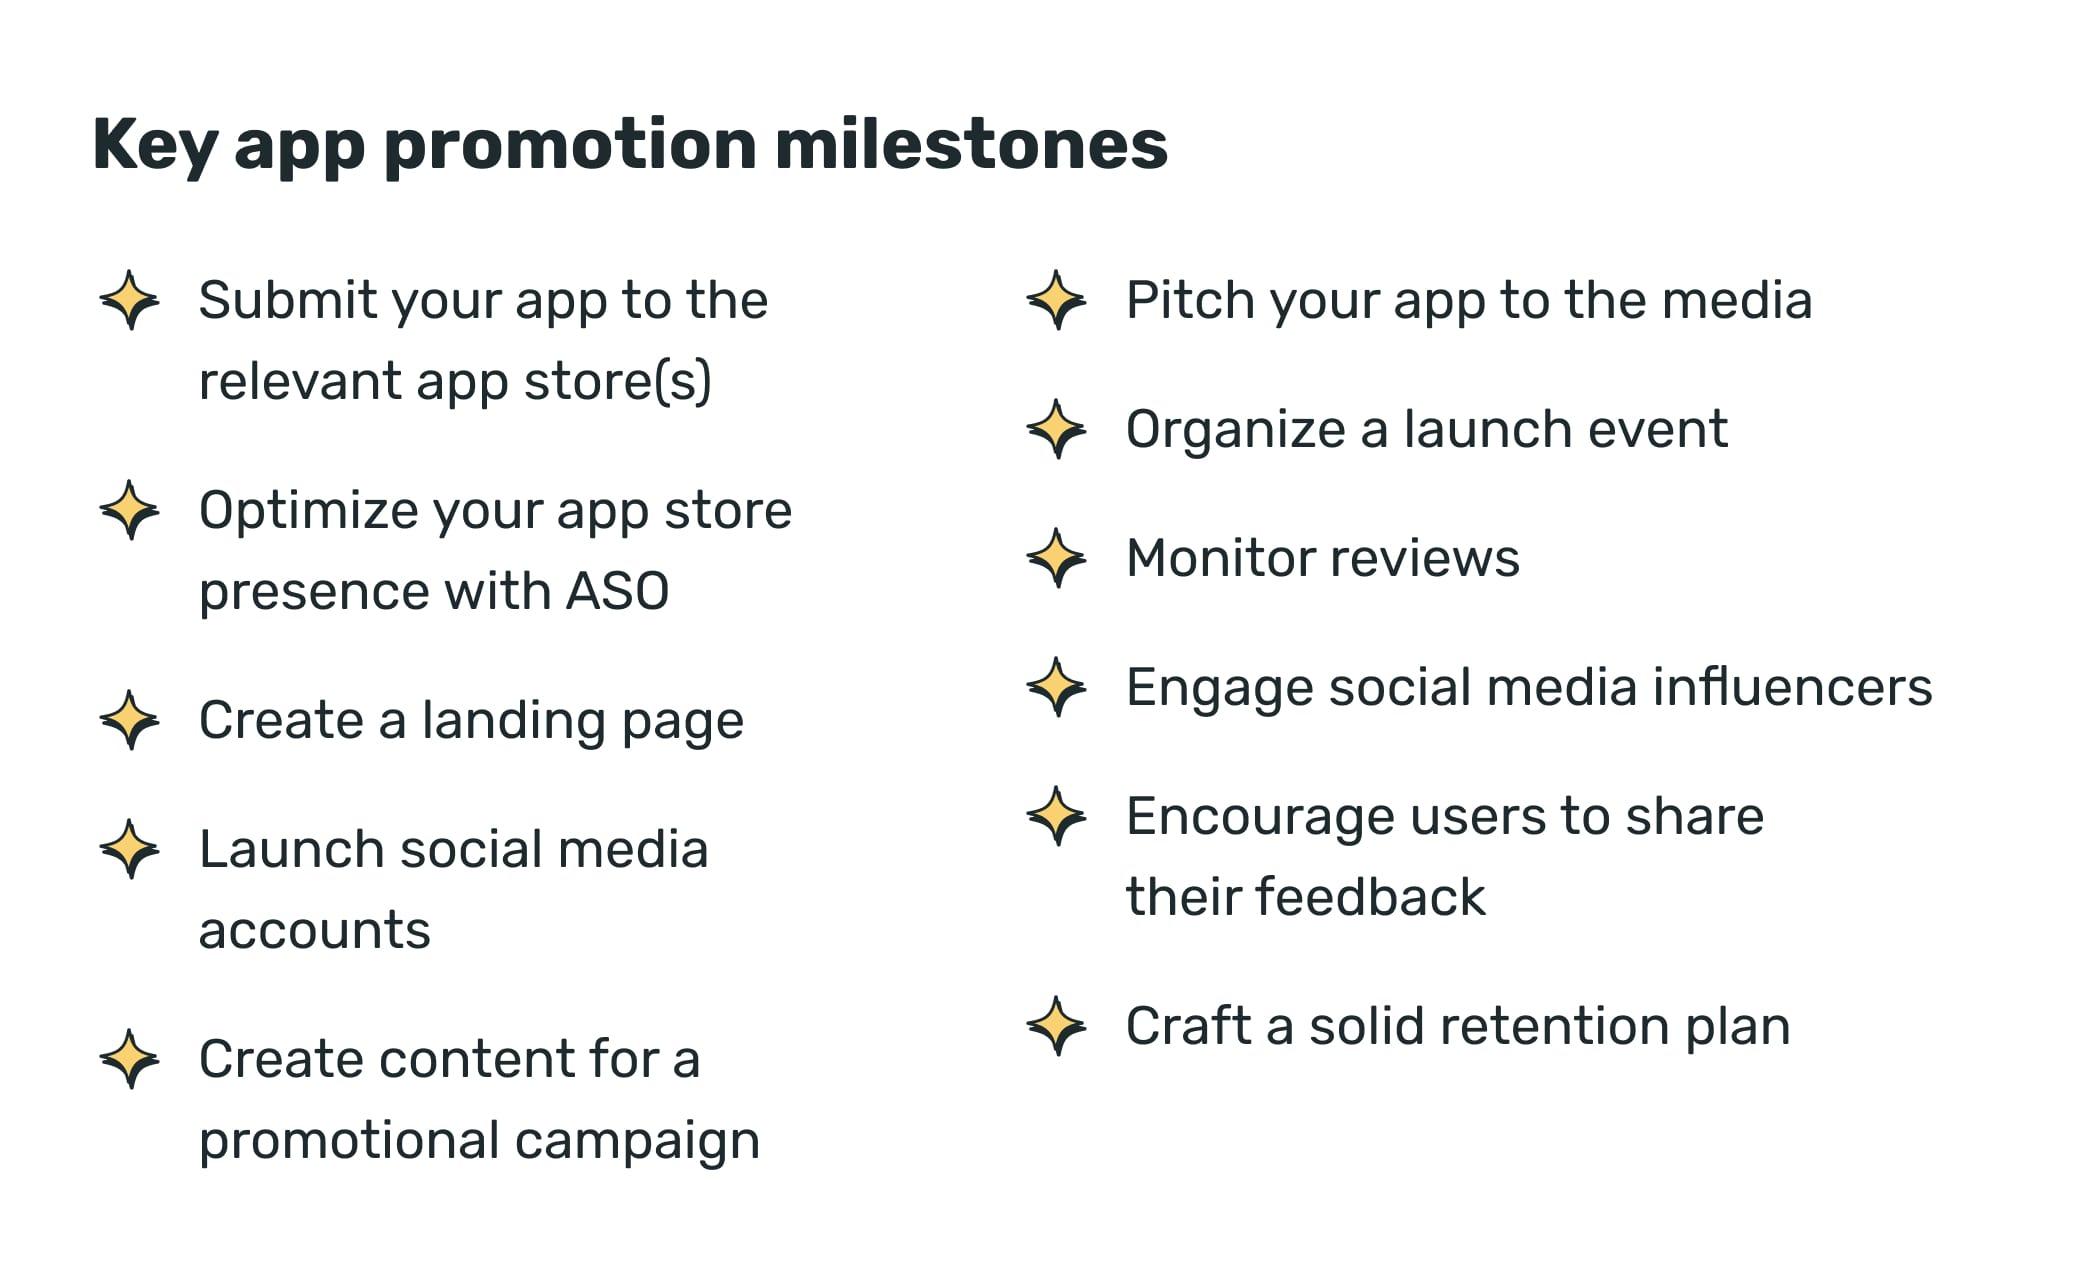 How to launch a mobile app: key app promotion milestones